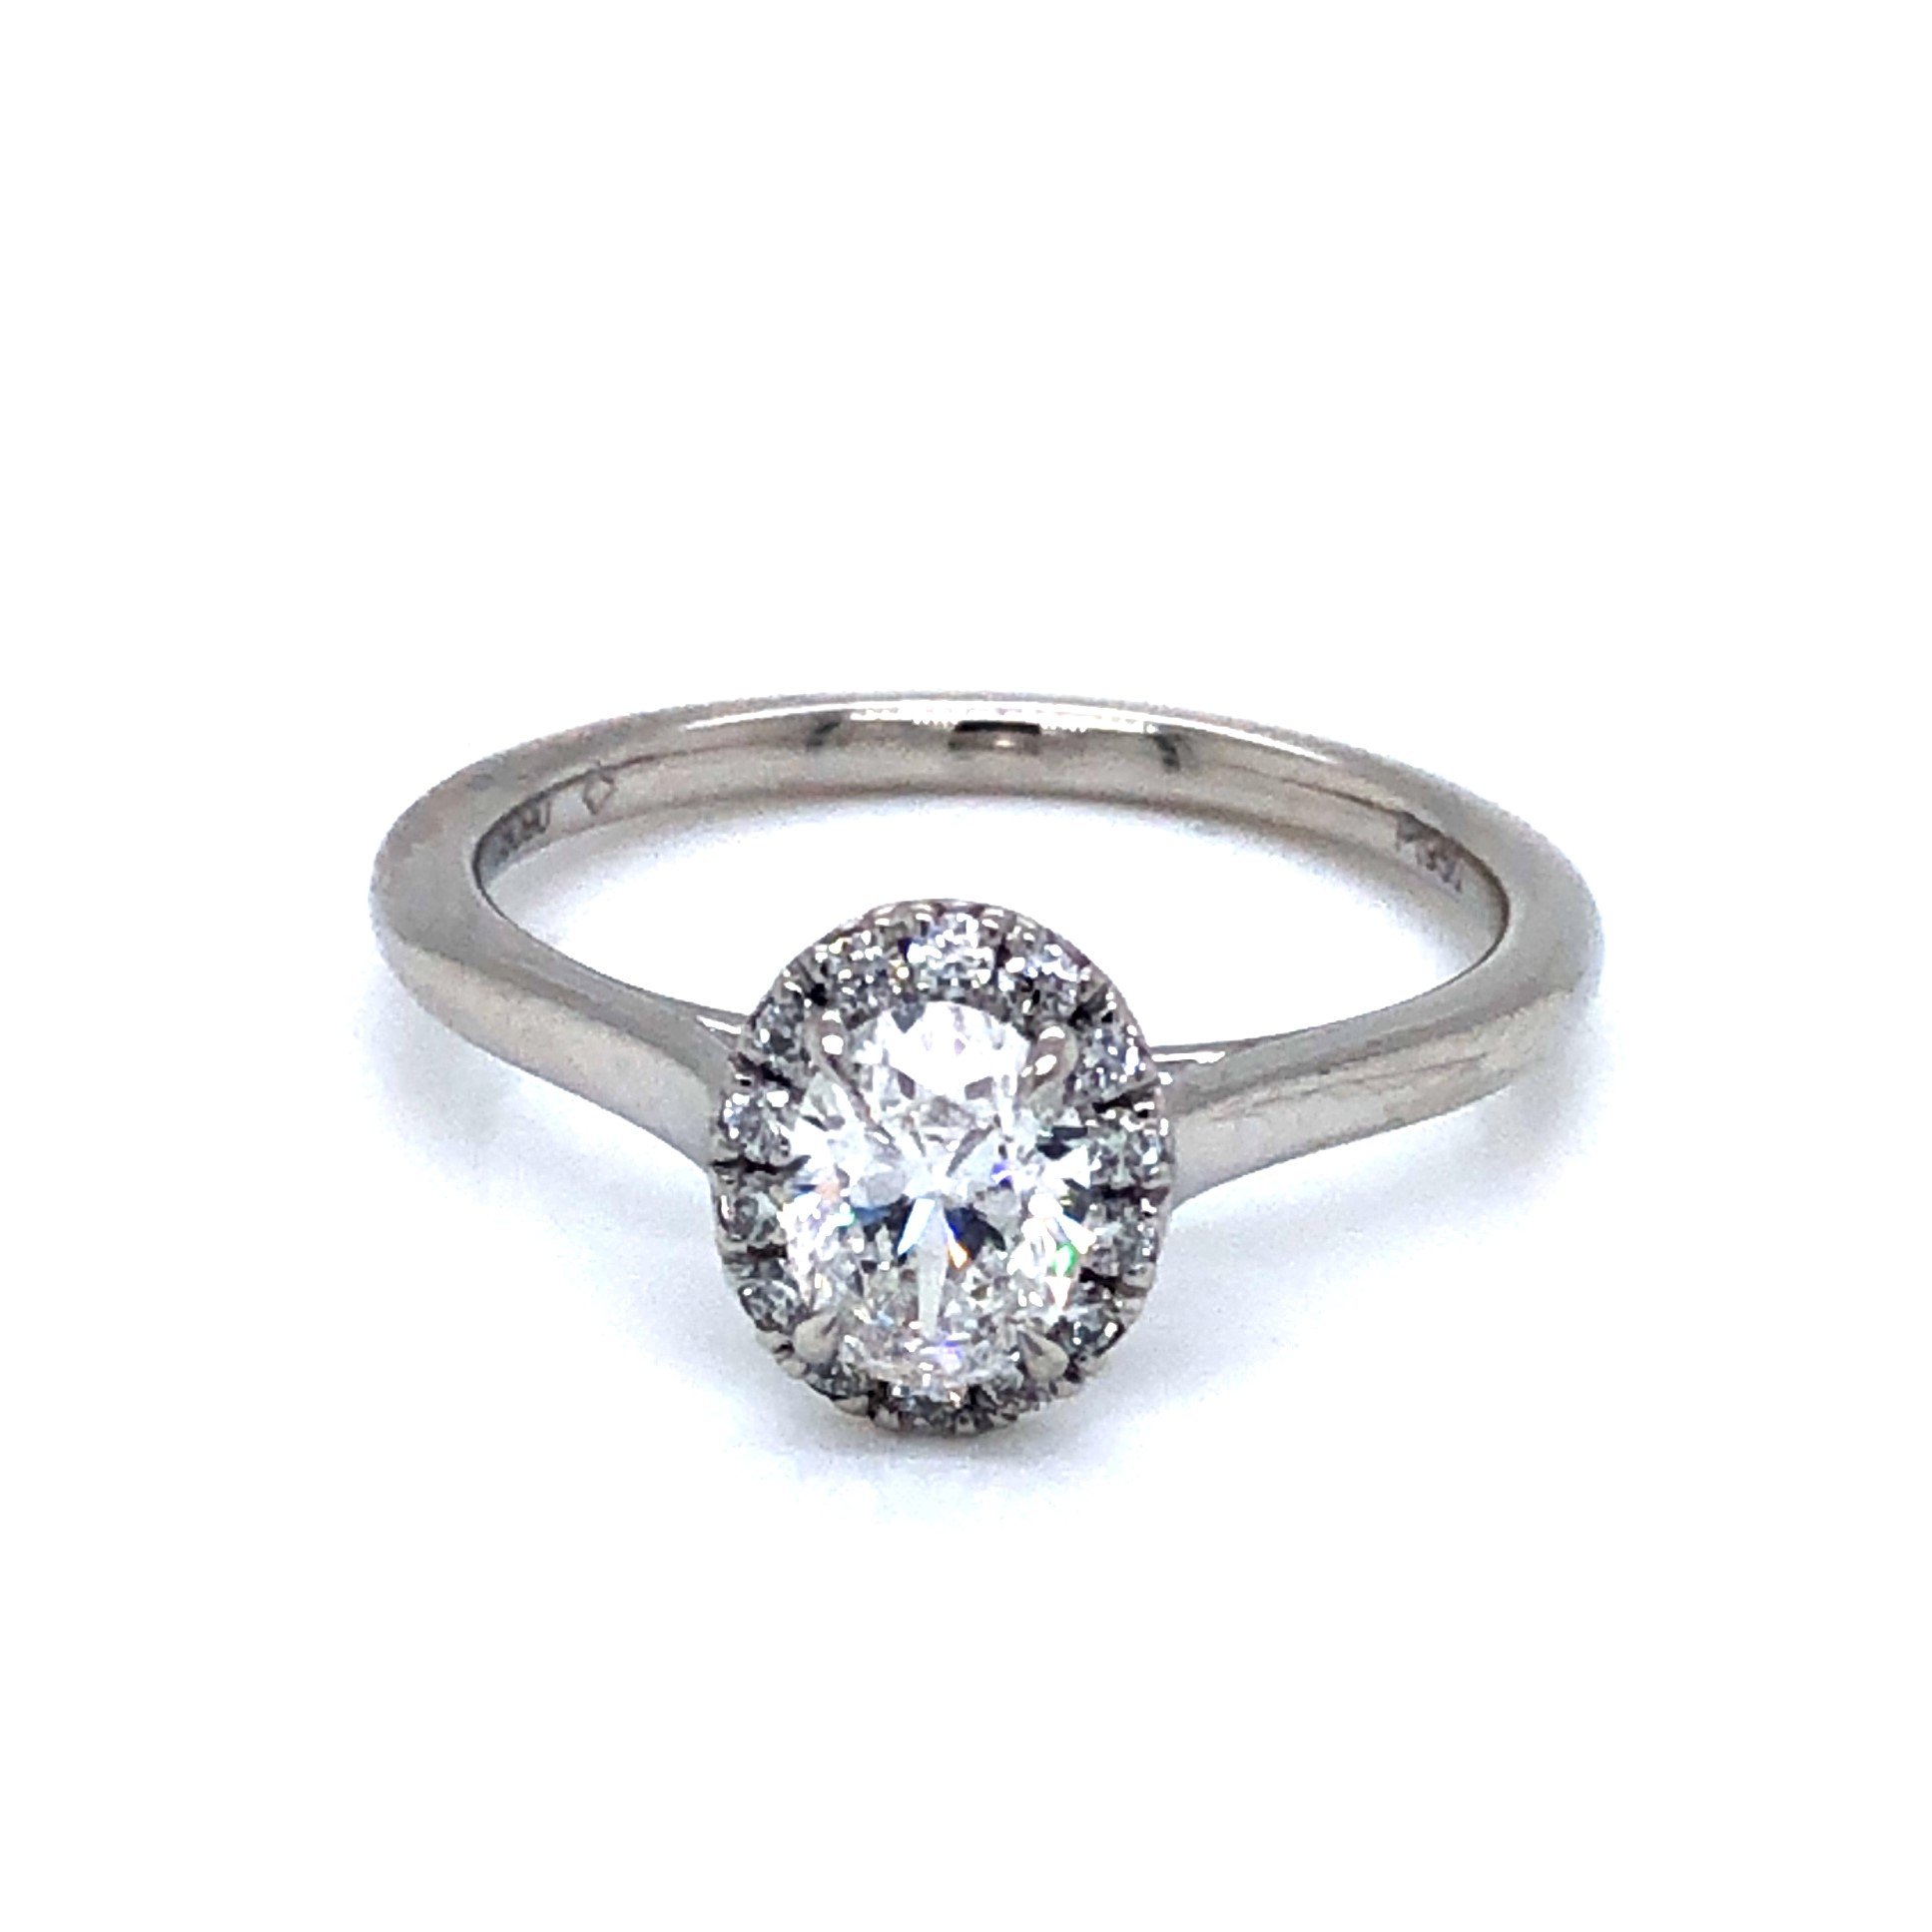 Ladies Platinum Engagement Ring With One 0.52Ct Oval F SI2 ForeverMark Diamond And 14=0.15Tw Round Brilliant G VS Diamonds